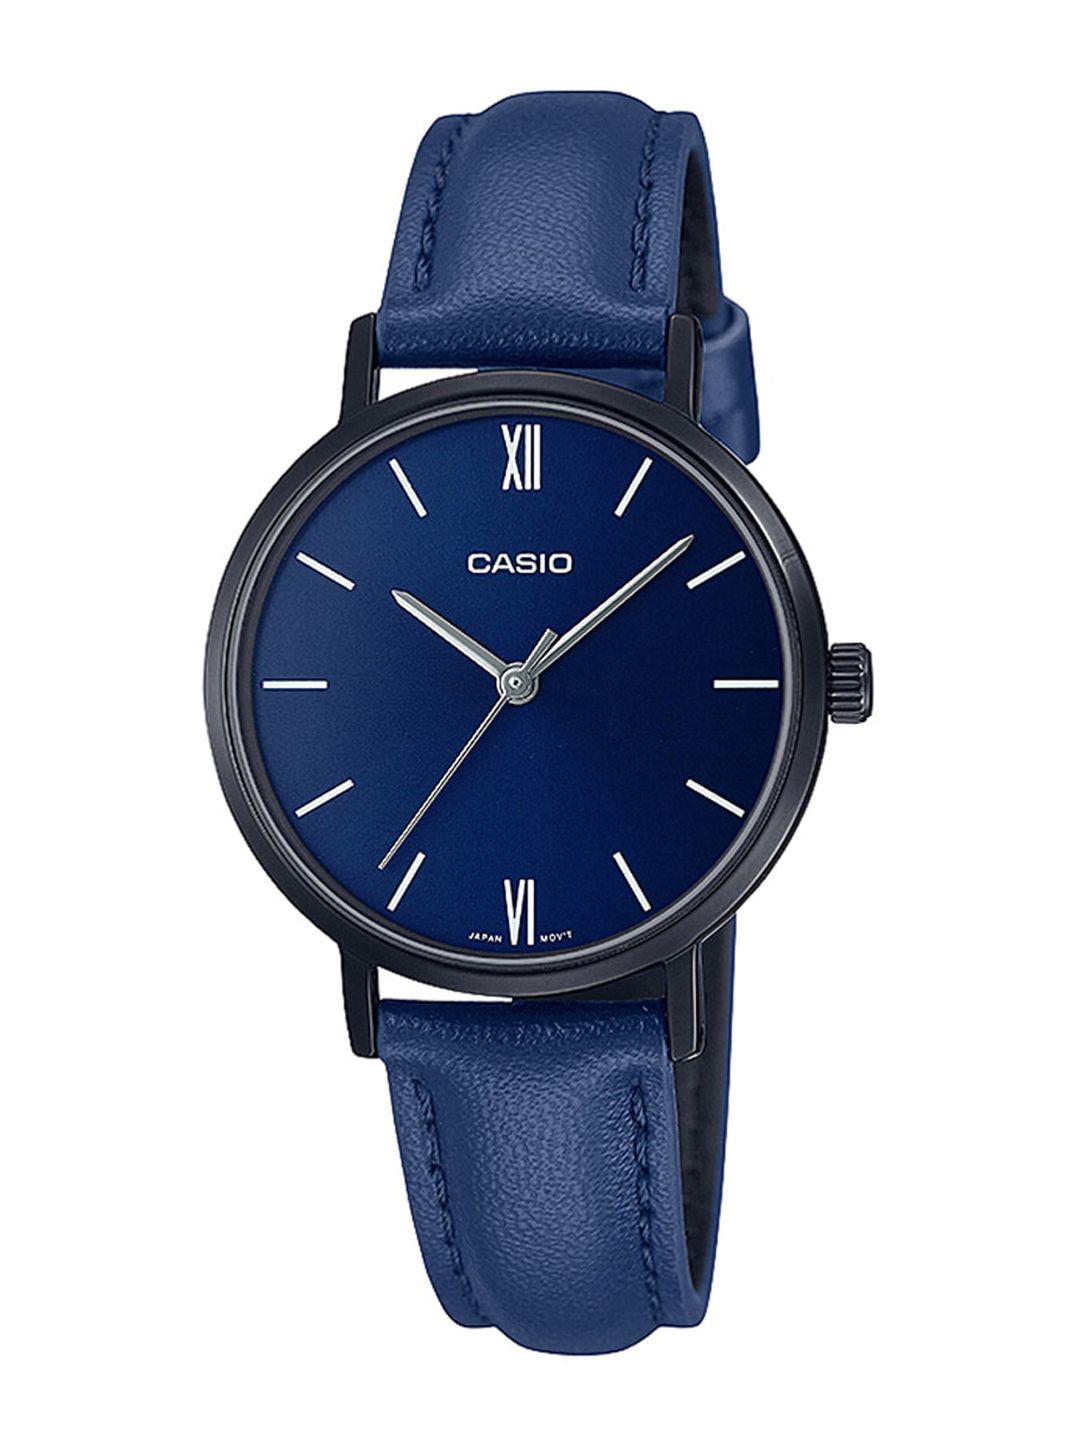 CASIO Women Blue Dial & Blue Leather Straps Analogue Watch Price in India